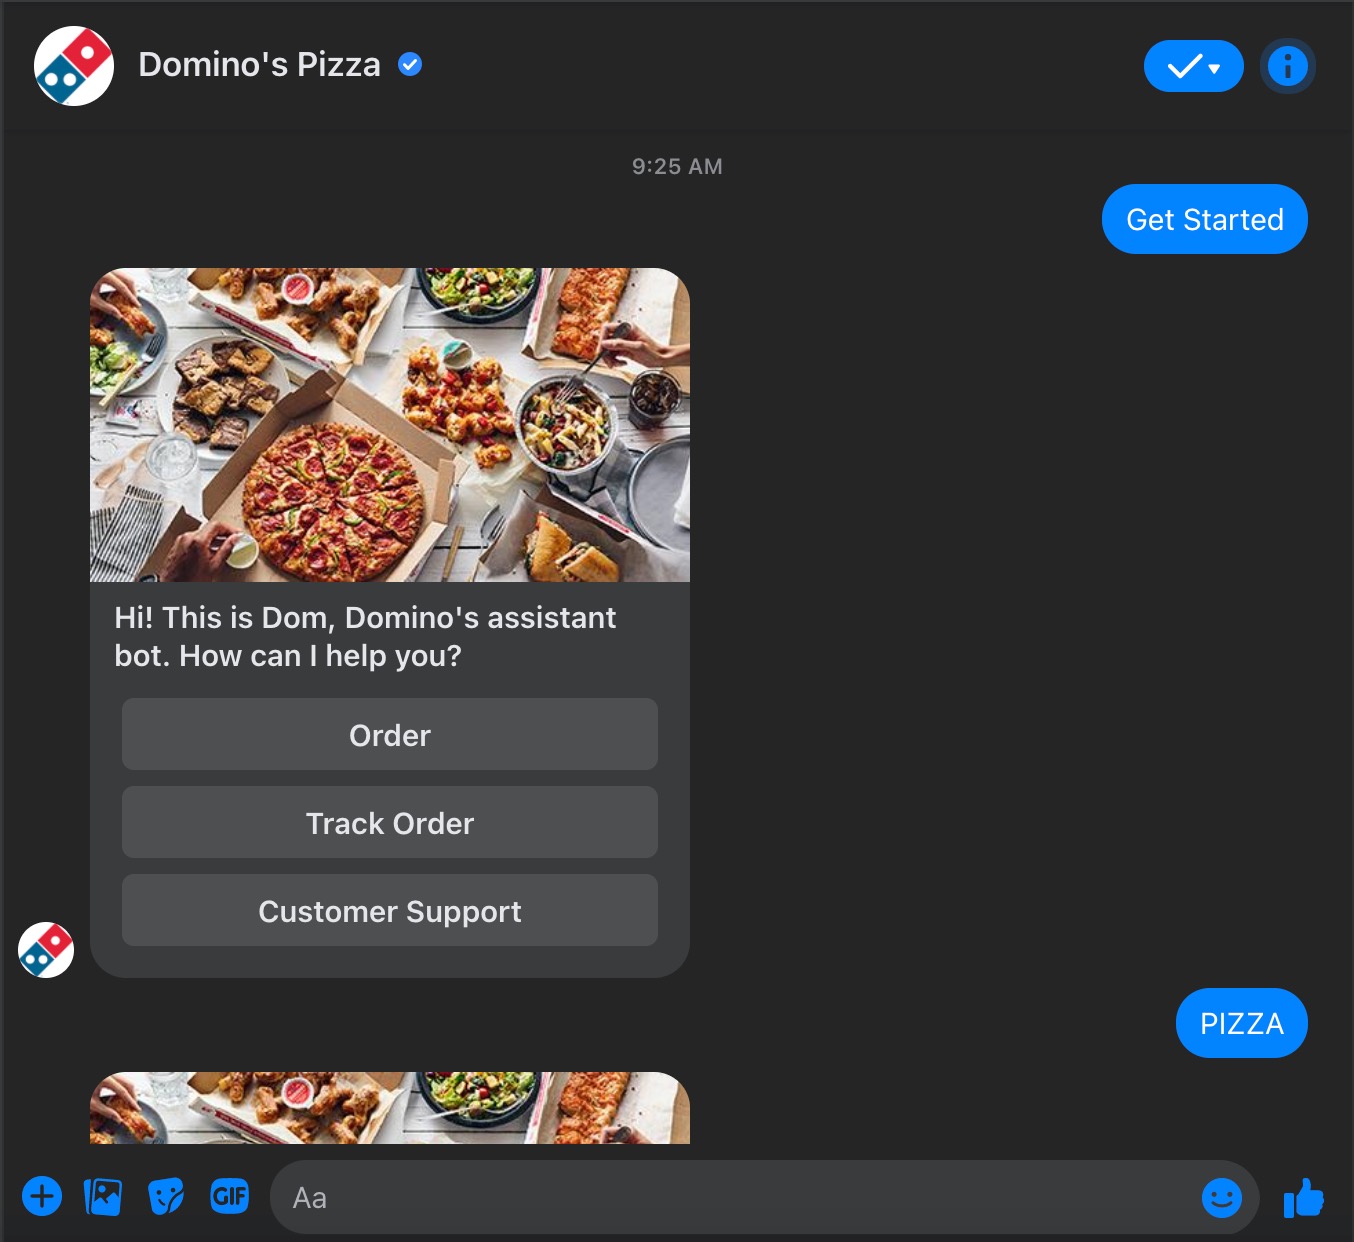 Domino's Pizza Facebook chatbot